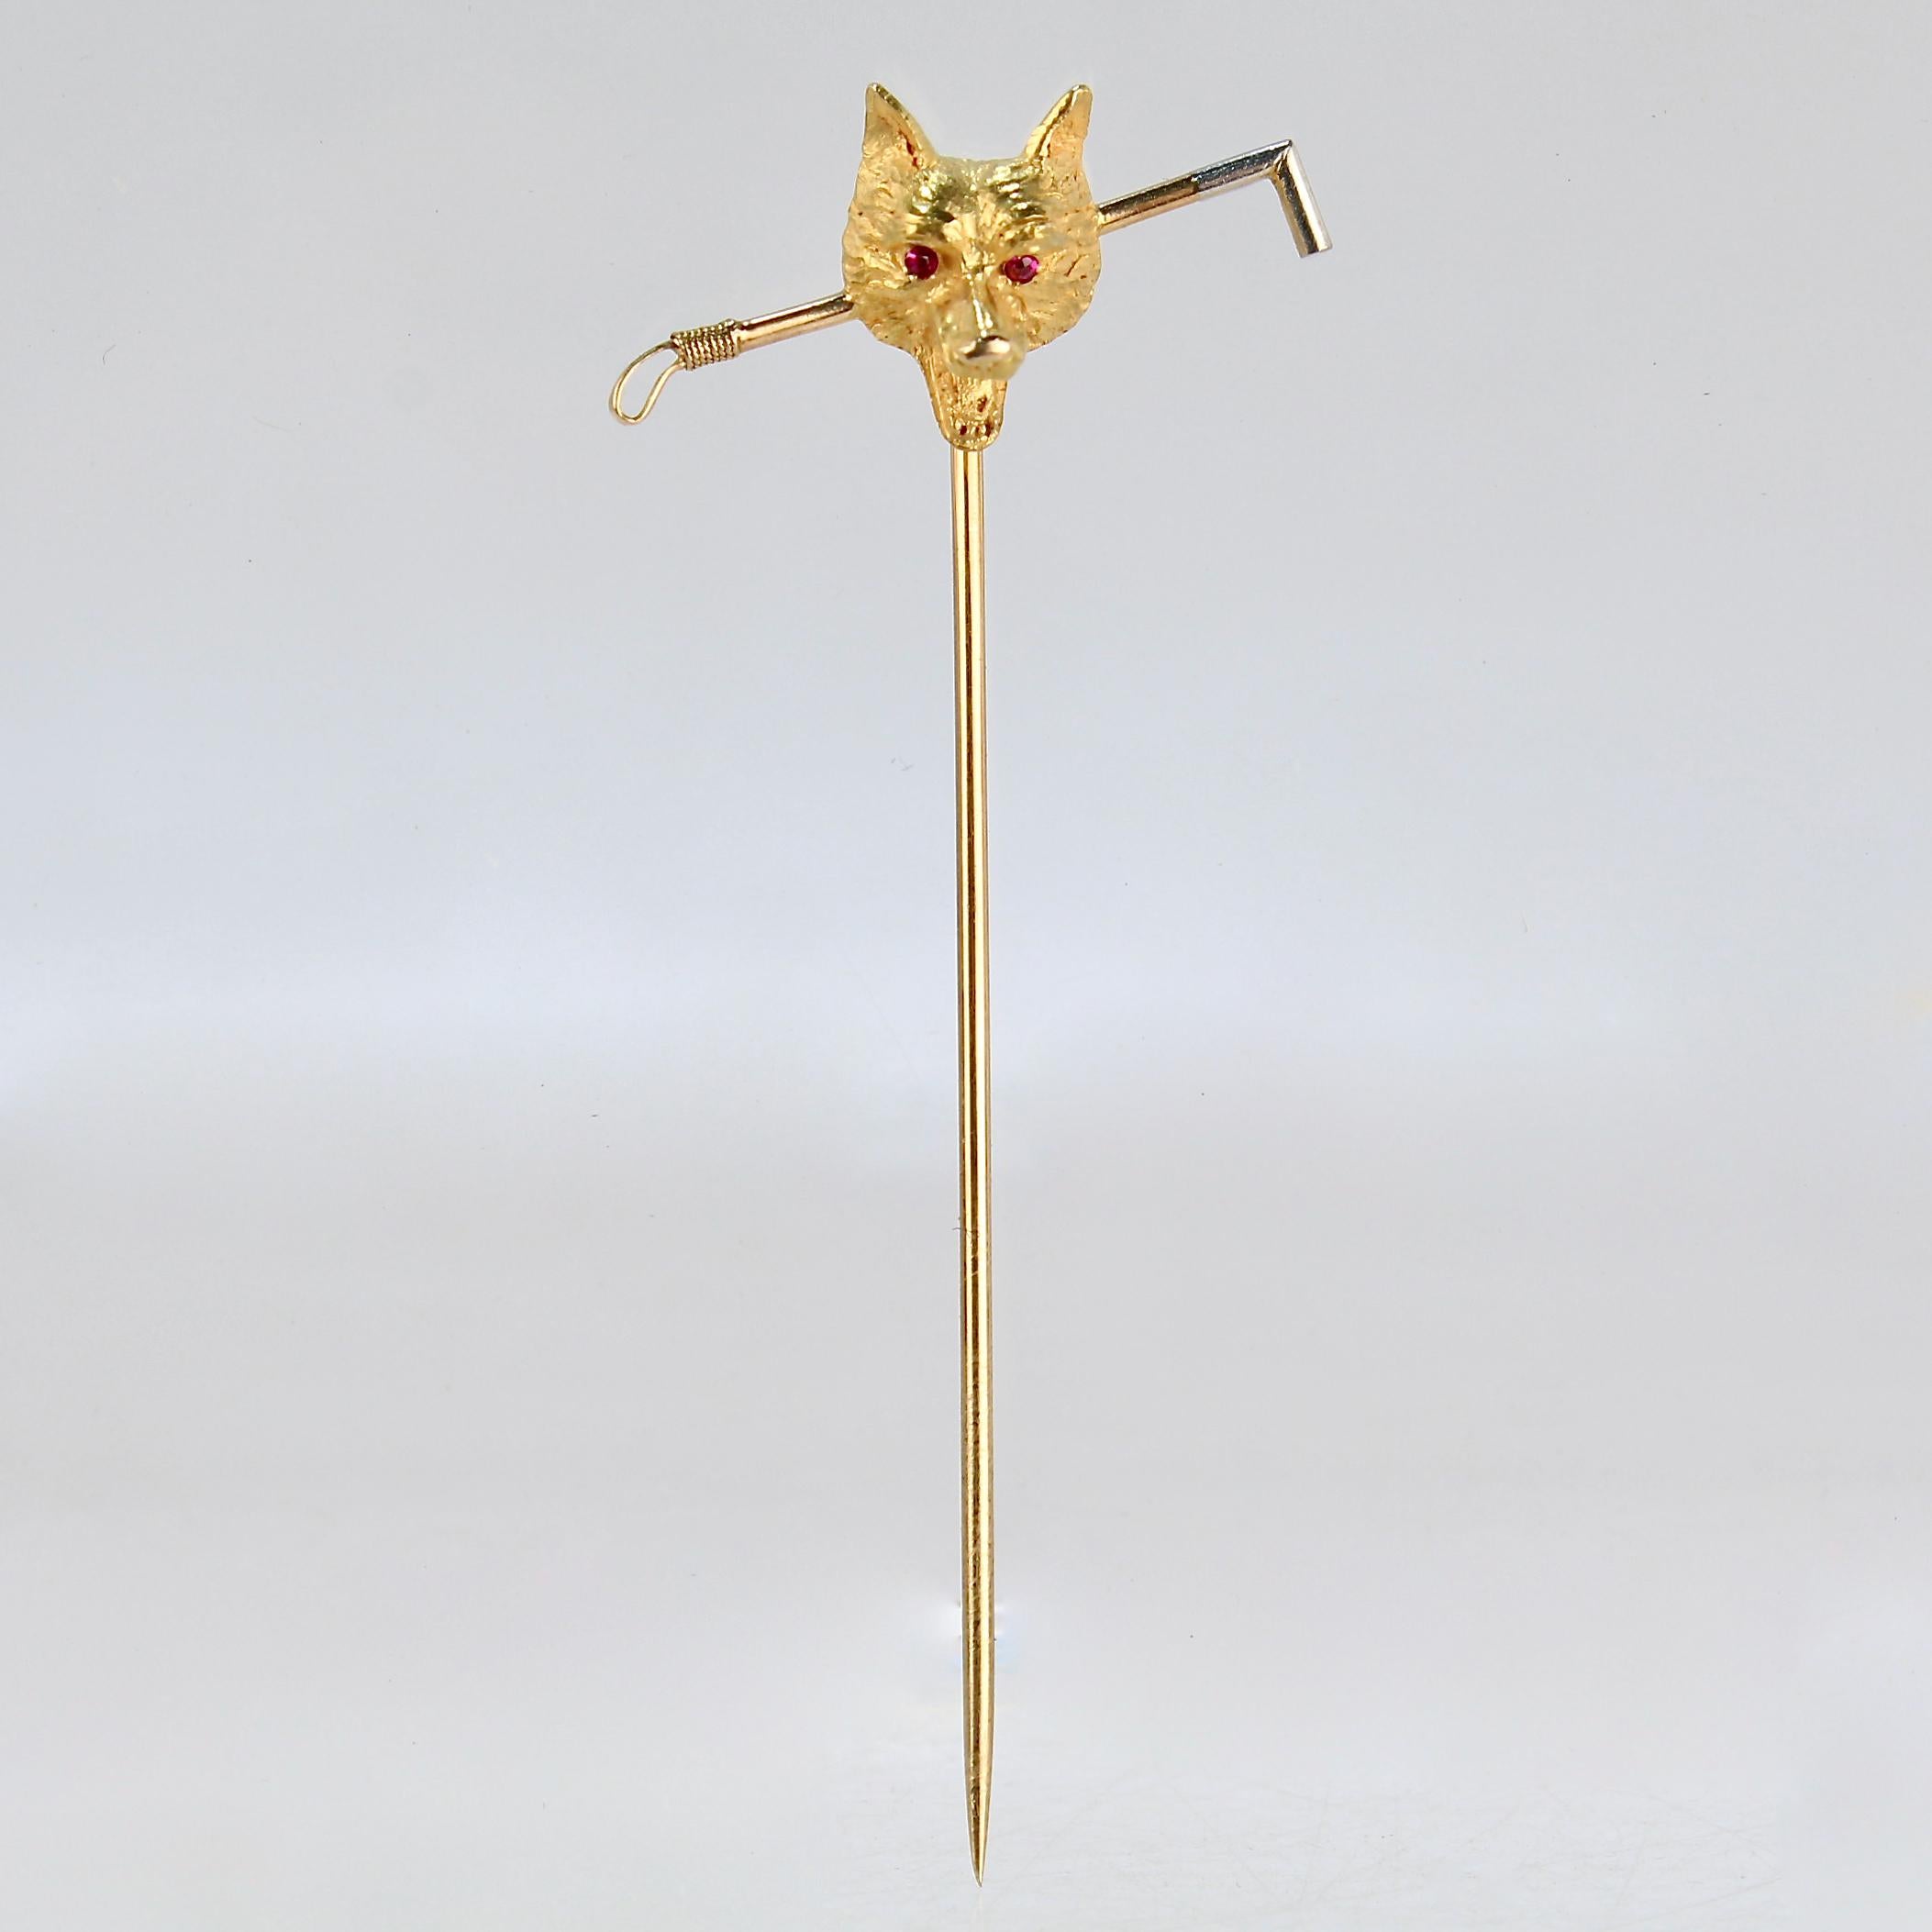 A very fine antique equestrian stickpin.

In the form of fox head and riding crop. 

Flush set with two small rubies as eyes and platinum-topped to the tips of the crop.

Signed with a partial maker's mark. Likely for Bippart & Co. 

Simply a great